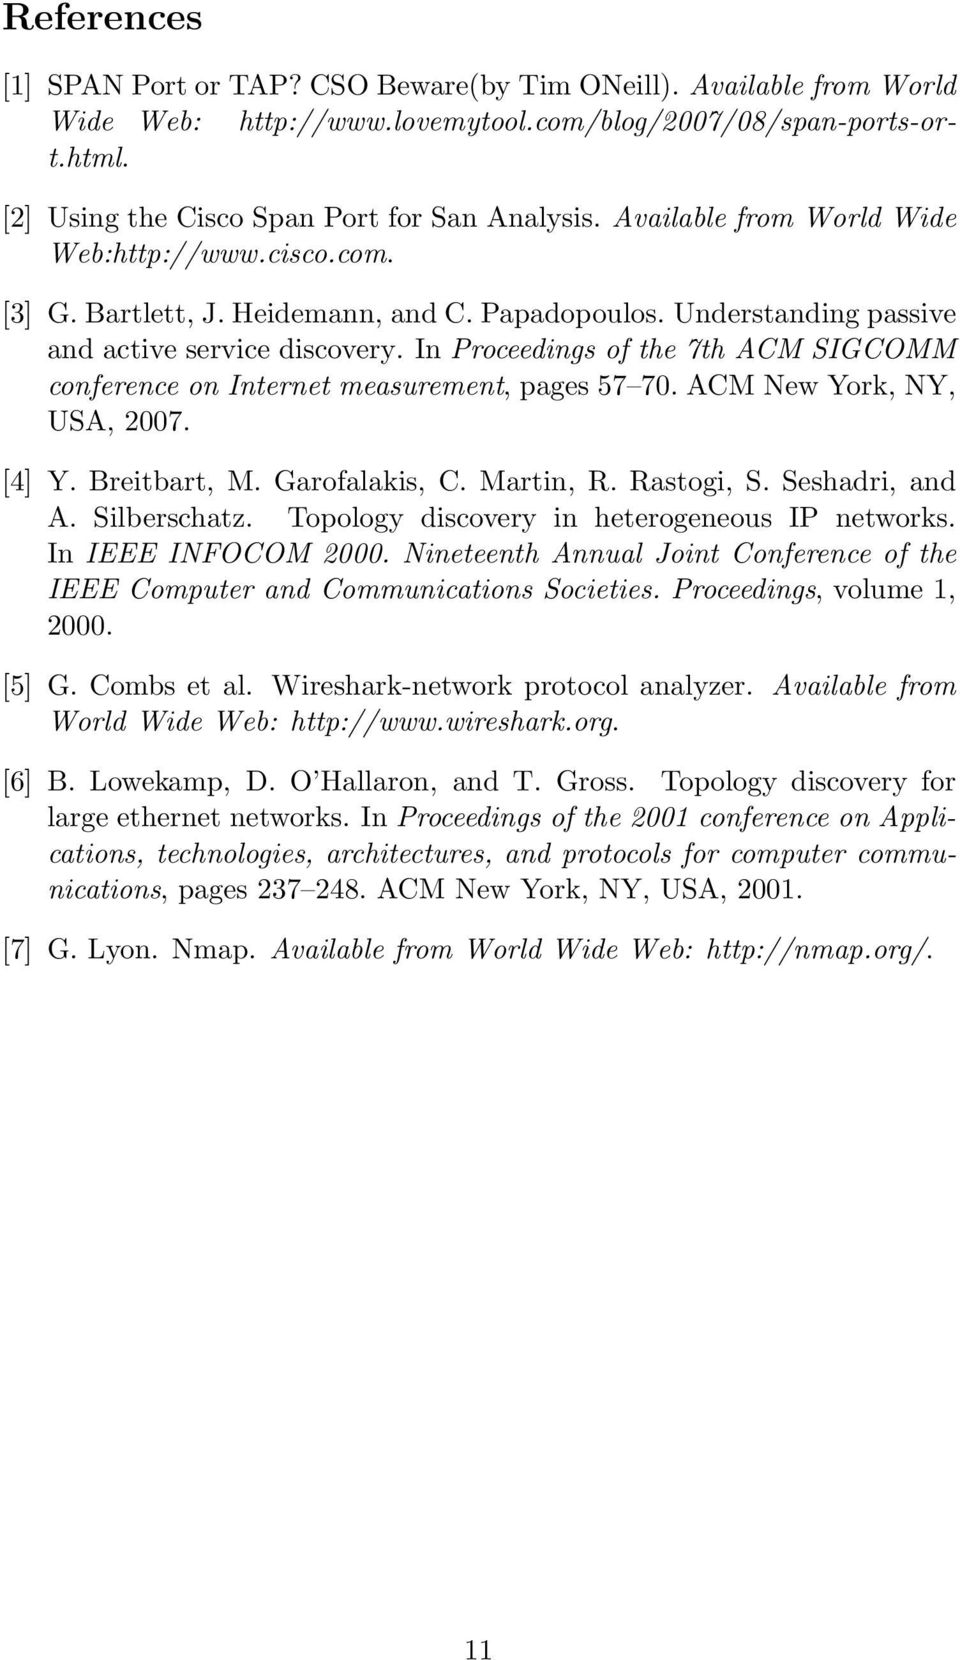 In Proceedings of the 7th ACM SIGCOMM conference on Internet measurement, pages 57 70. ACM New York, NY, USA, 2007. [4] Y. Breitbart, M. Garofalakis, C. Martin, R. Rastogi, S. Seshadri, and A.